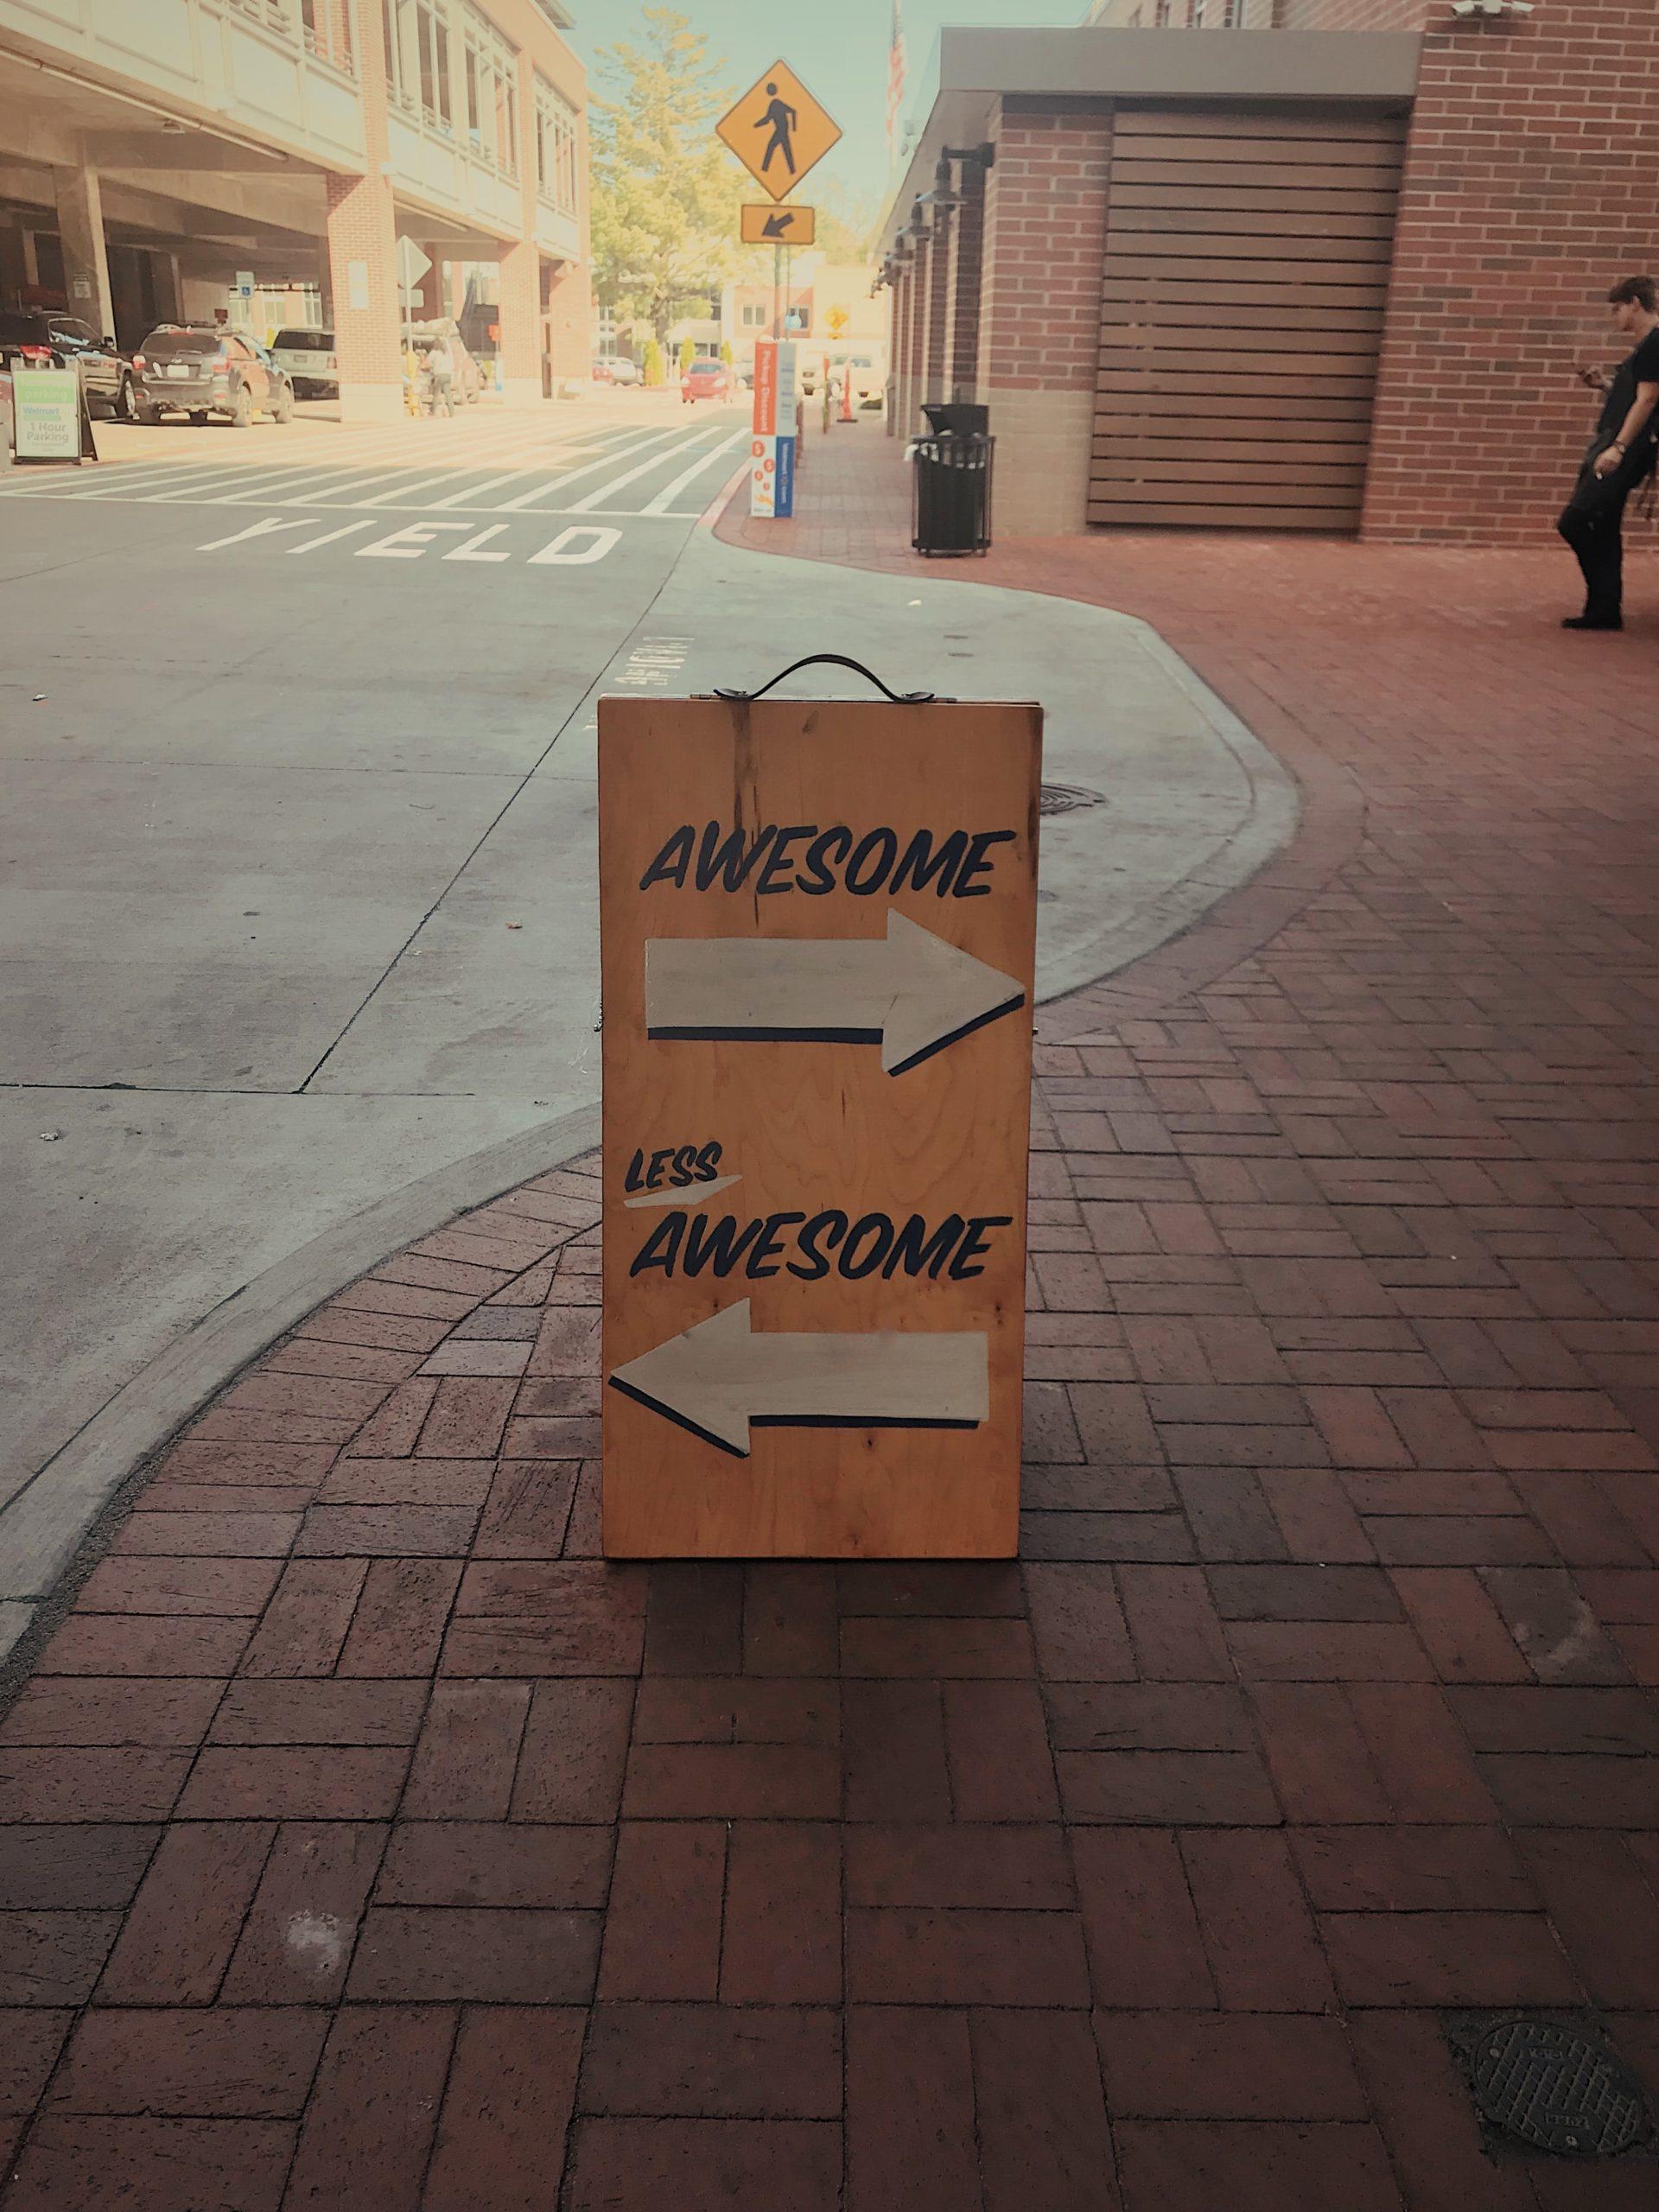 Awesome/Less Awesome Sandwich Board